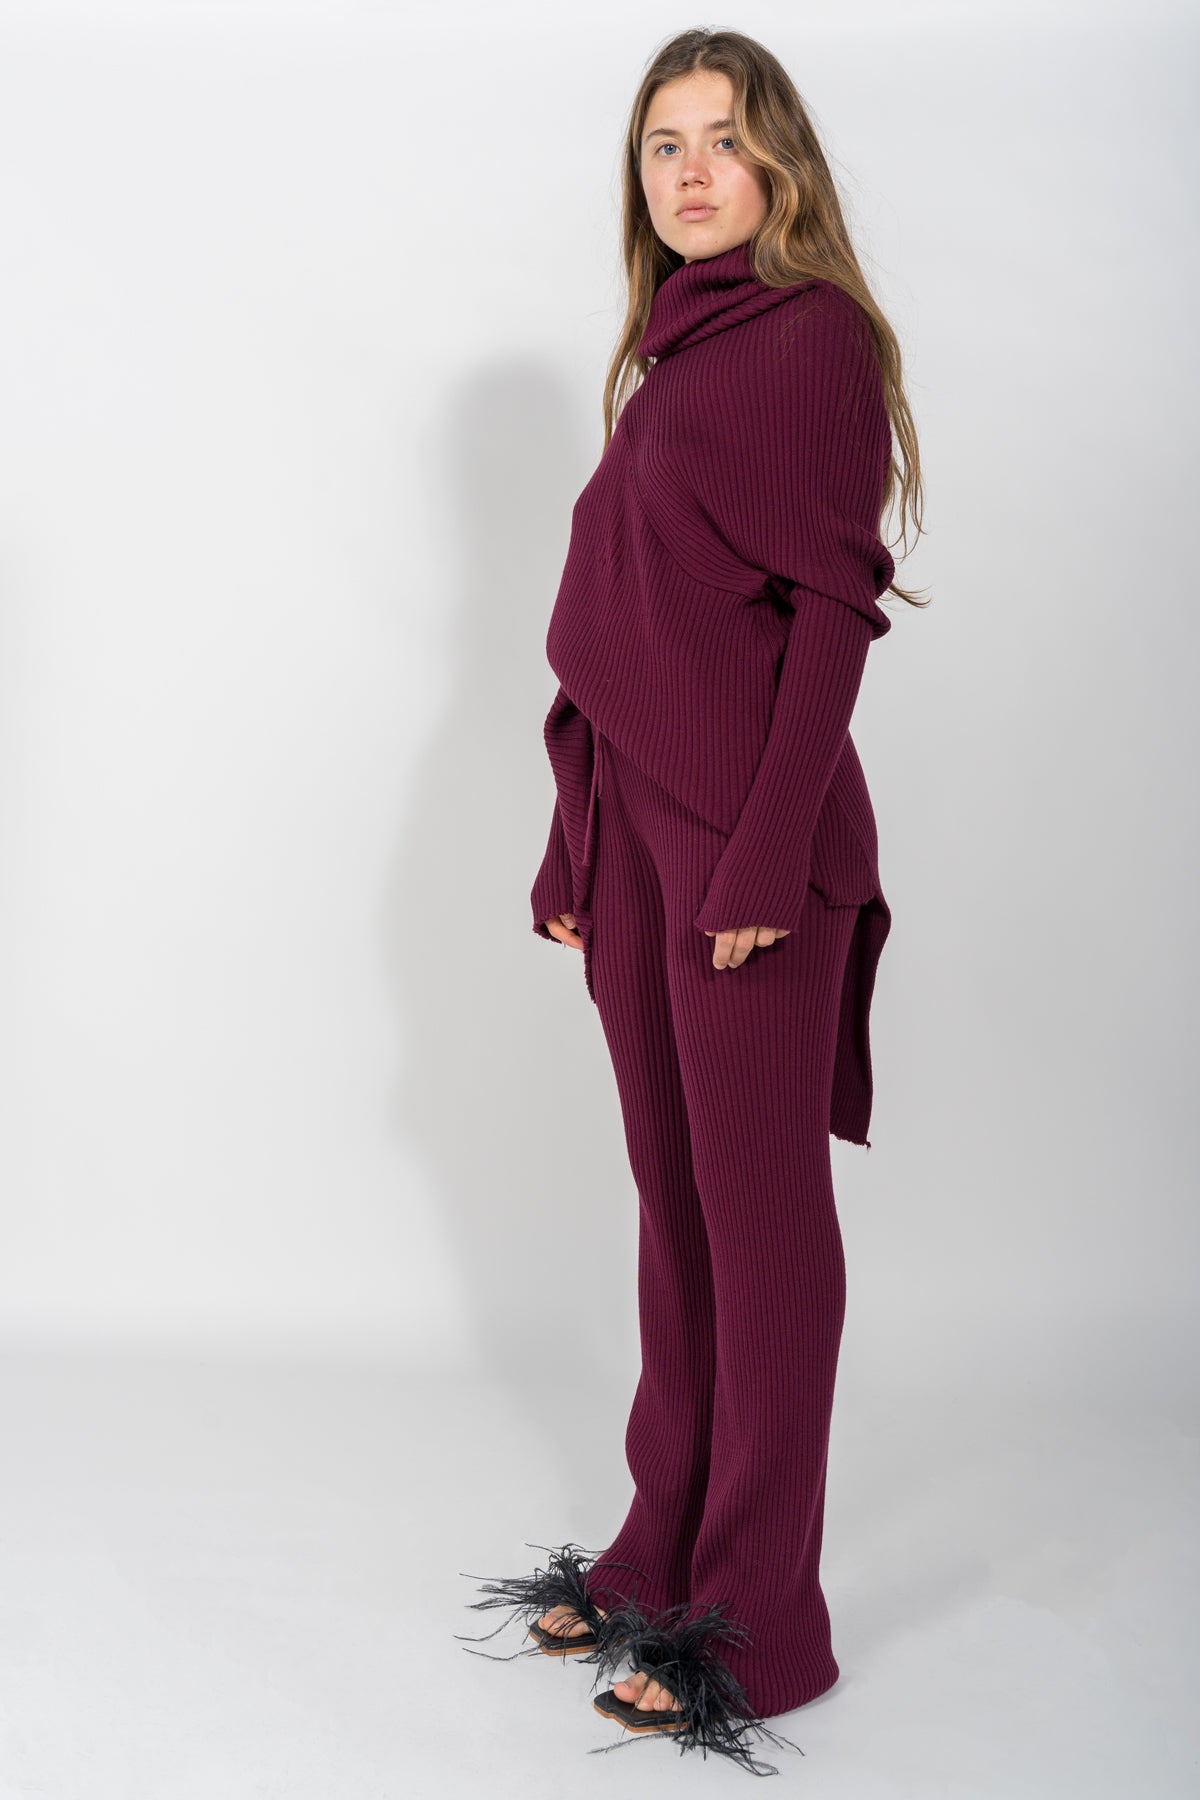 AUBERGINE KNITTED TROUSERS marques almeida